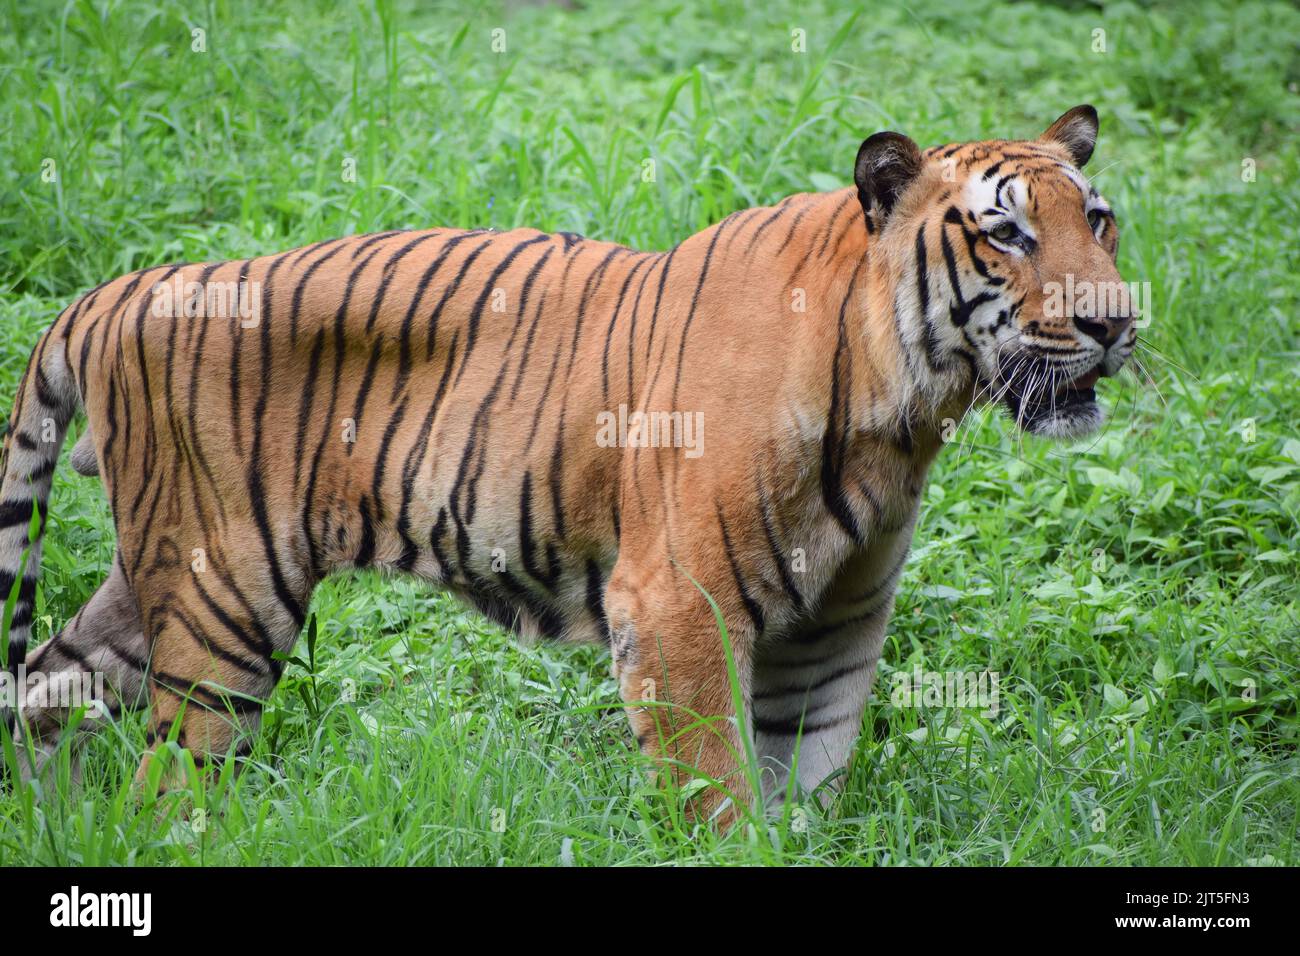 Indian tiger is standing on a grass field looking away from the camera. Stock Photo